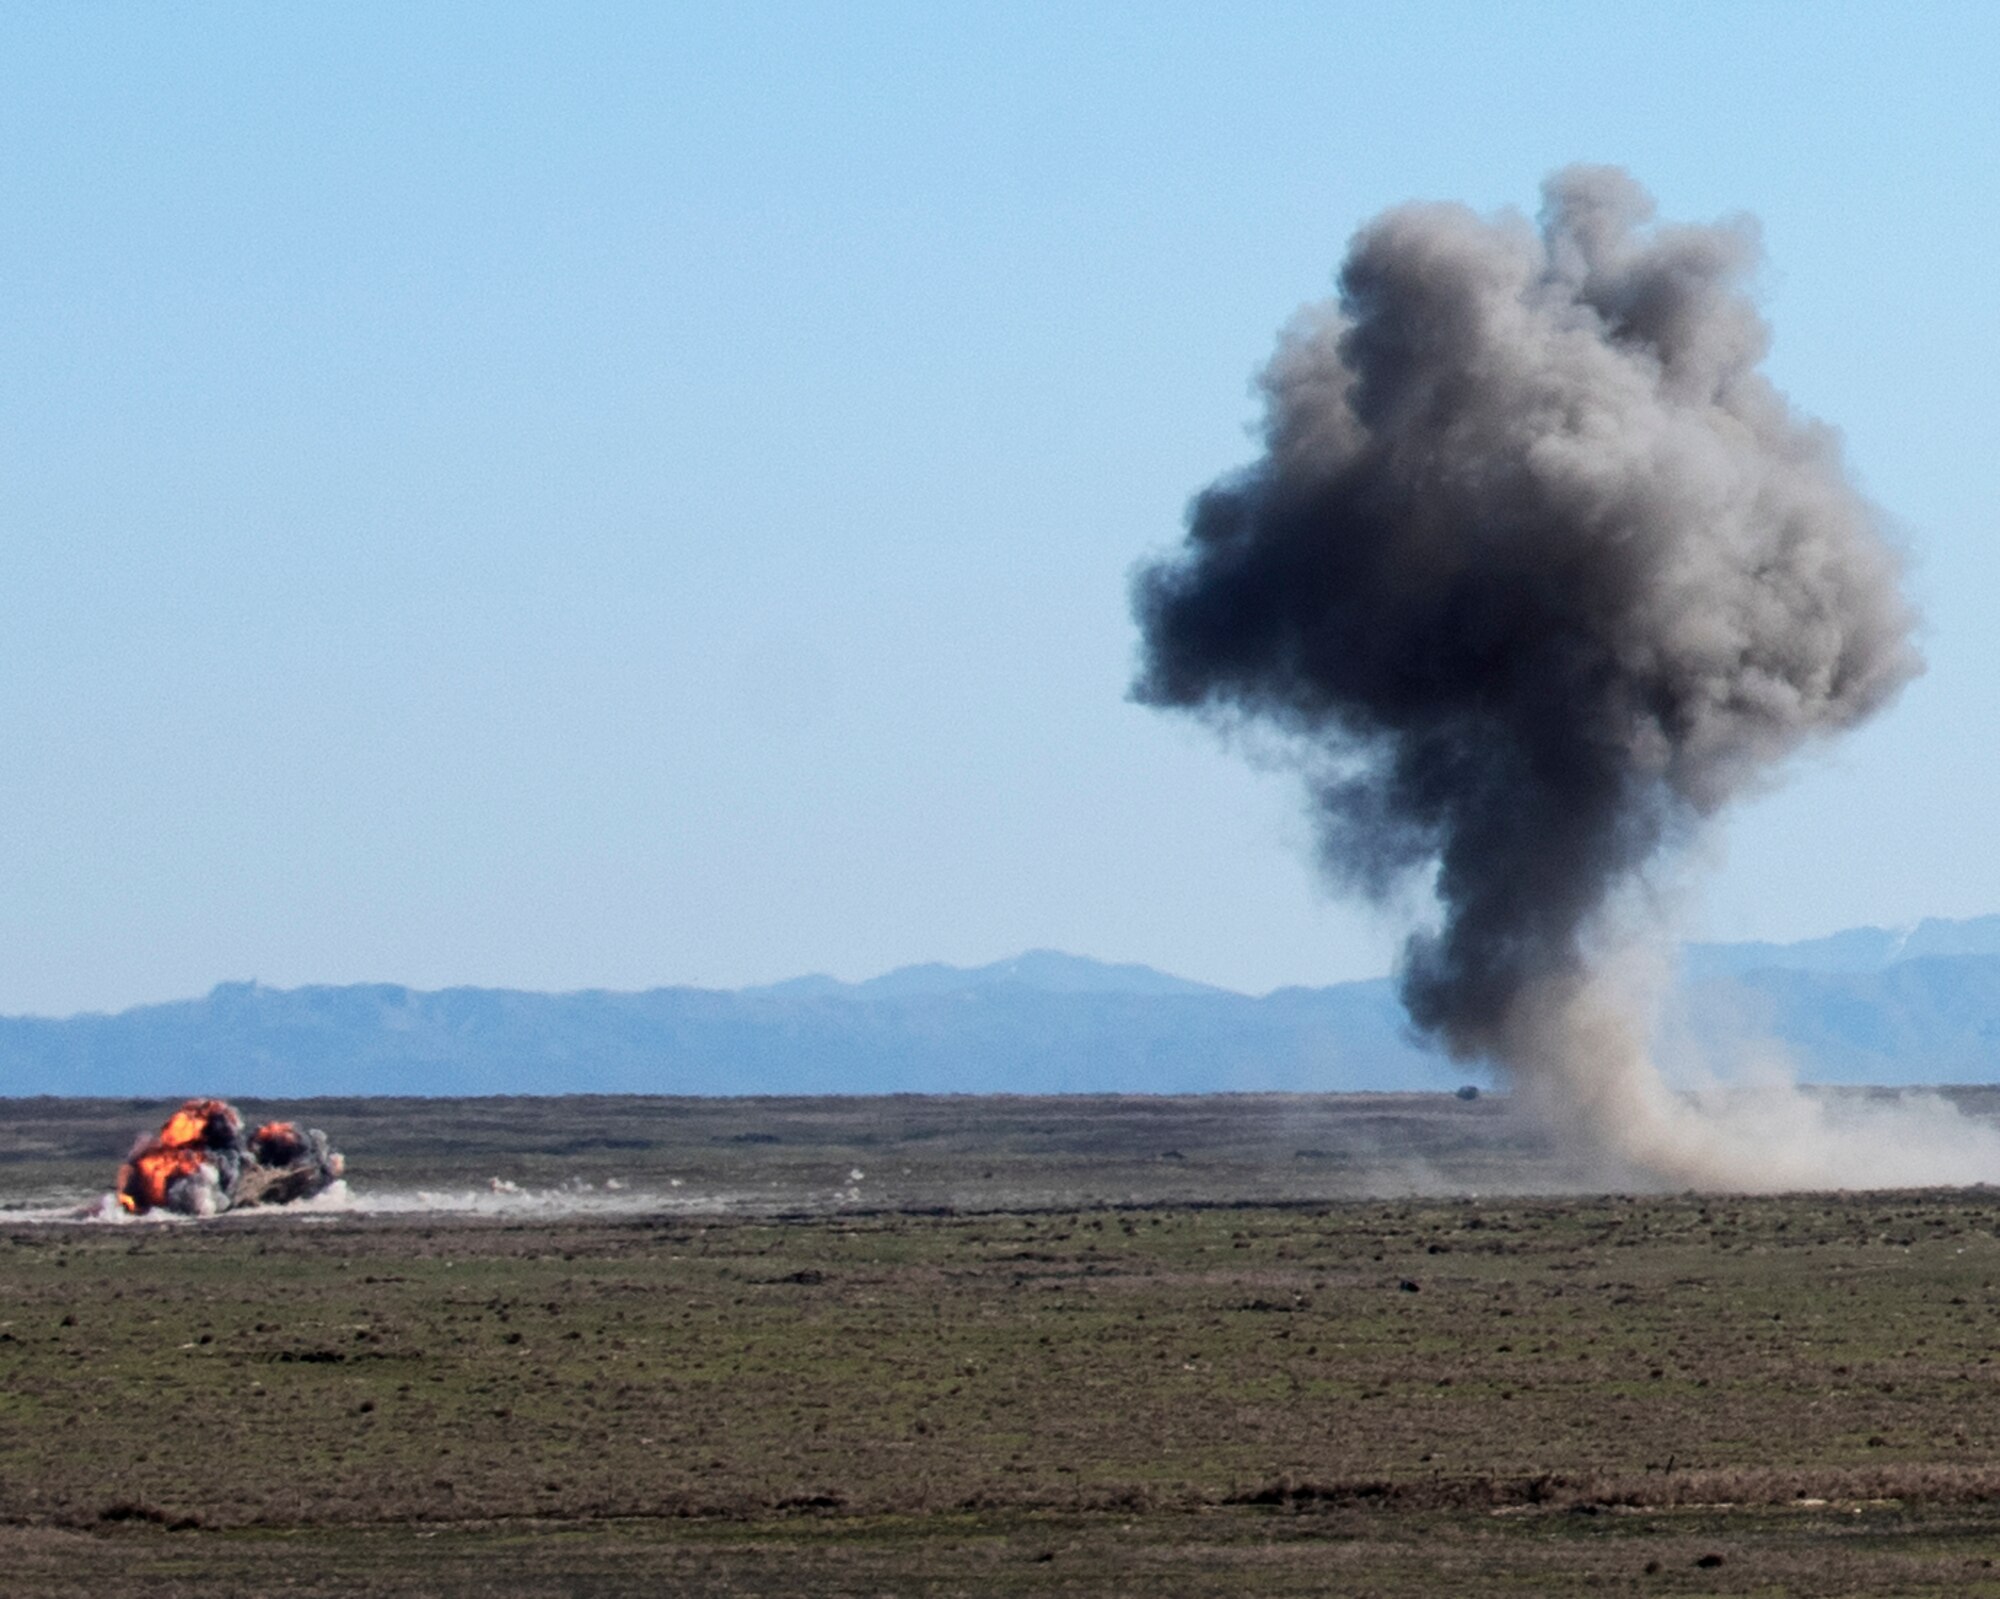 Explosions from two Mark 82 bombs ignite, April 17, 2020, at Orchard Combat Training Center, Idaho. Two F-15E Strike Eagles dropped live bombs while working directly with the Idaho Air National Guard to improve joint training capabilities. (U.S. Air Force photo by Airman Natalie Rubenak).